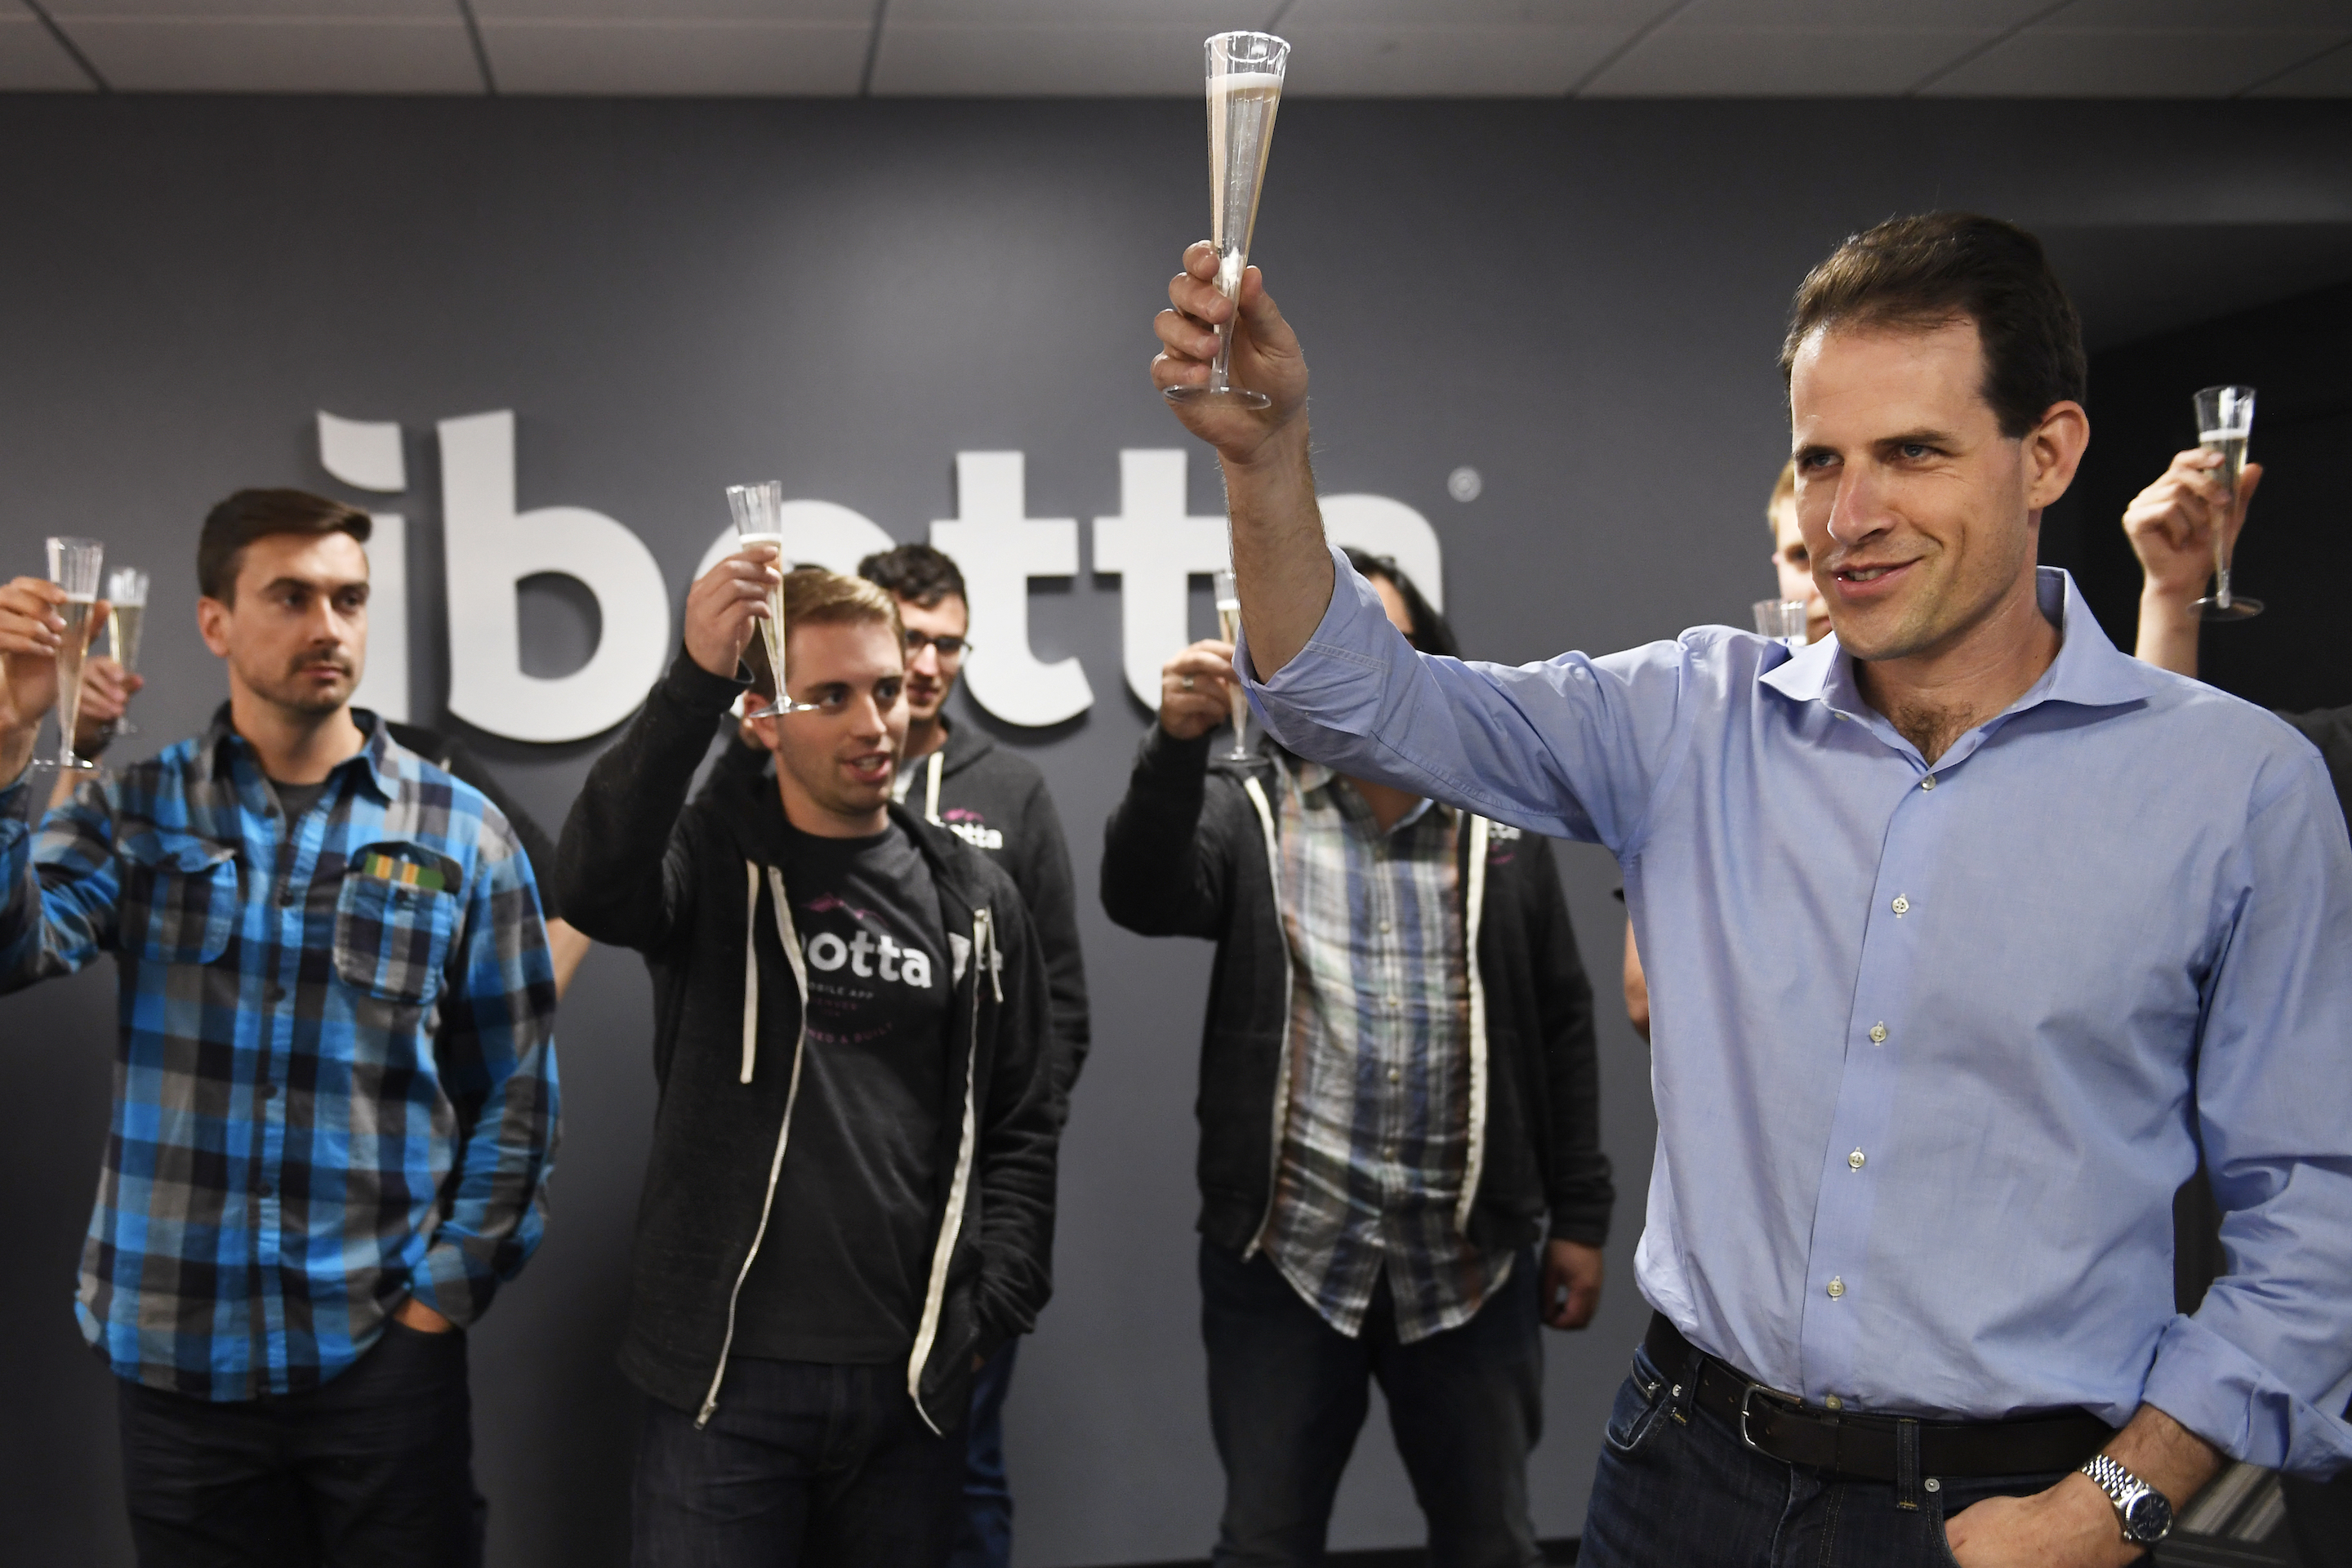 DENVER, CO - MAY 23: Ibotta&#039;s founder and CEO Bryan Leach raises his glass for a toast to the product and engineering team of Denver&#039;s well-known startup&#039;s relaunch of their mobile app. The complete overhaul of their mobile application took over 9 months and focused on user accessibility after more than 1,000 usability tests.  May 23, 2017 in Denver, Colorado. (Photo by Joe Amon/The Denver Post via Getty Images)